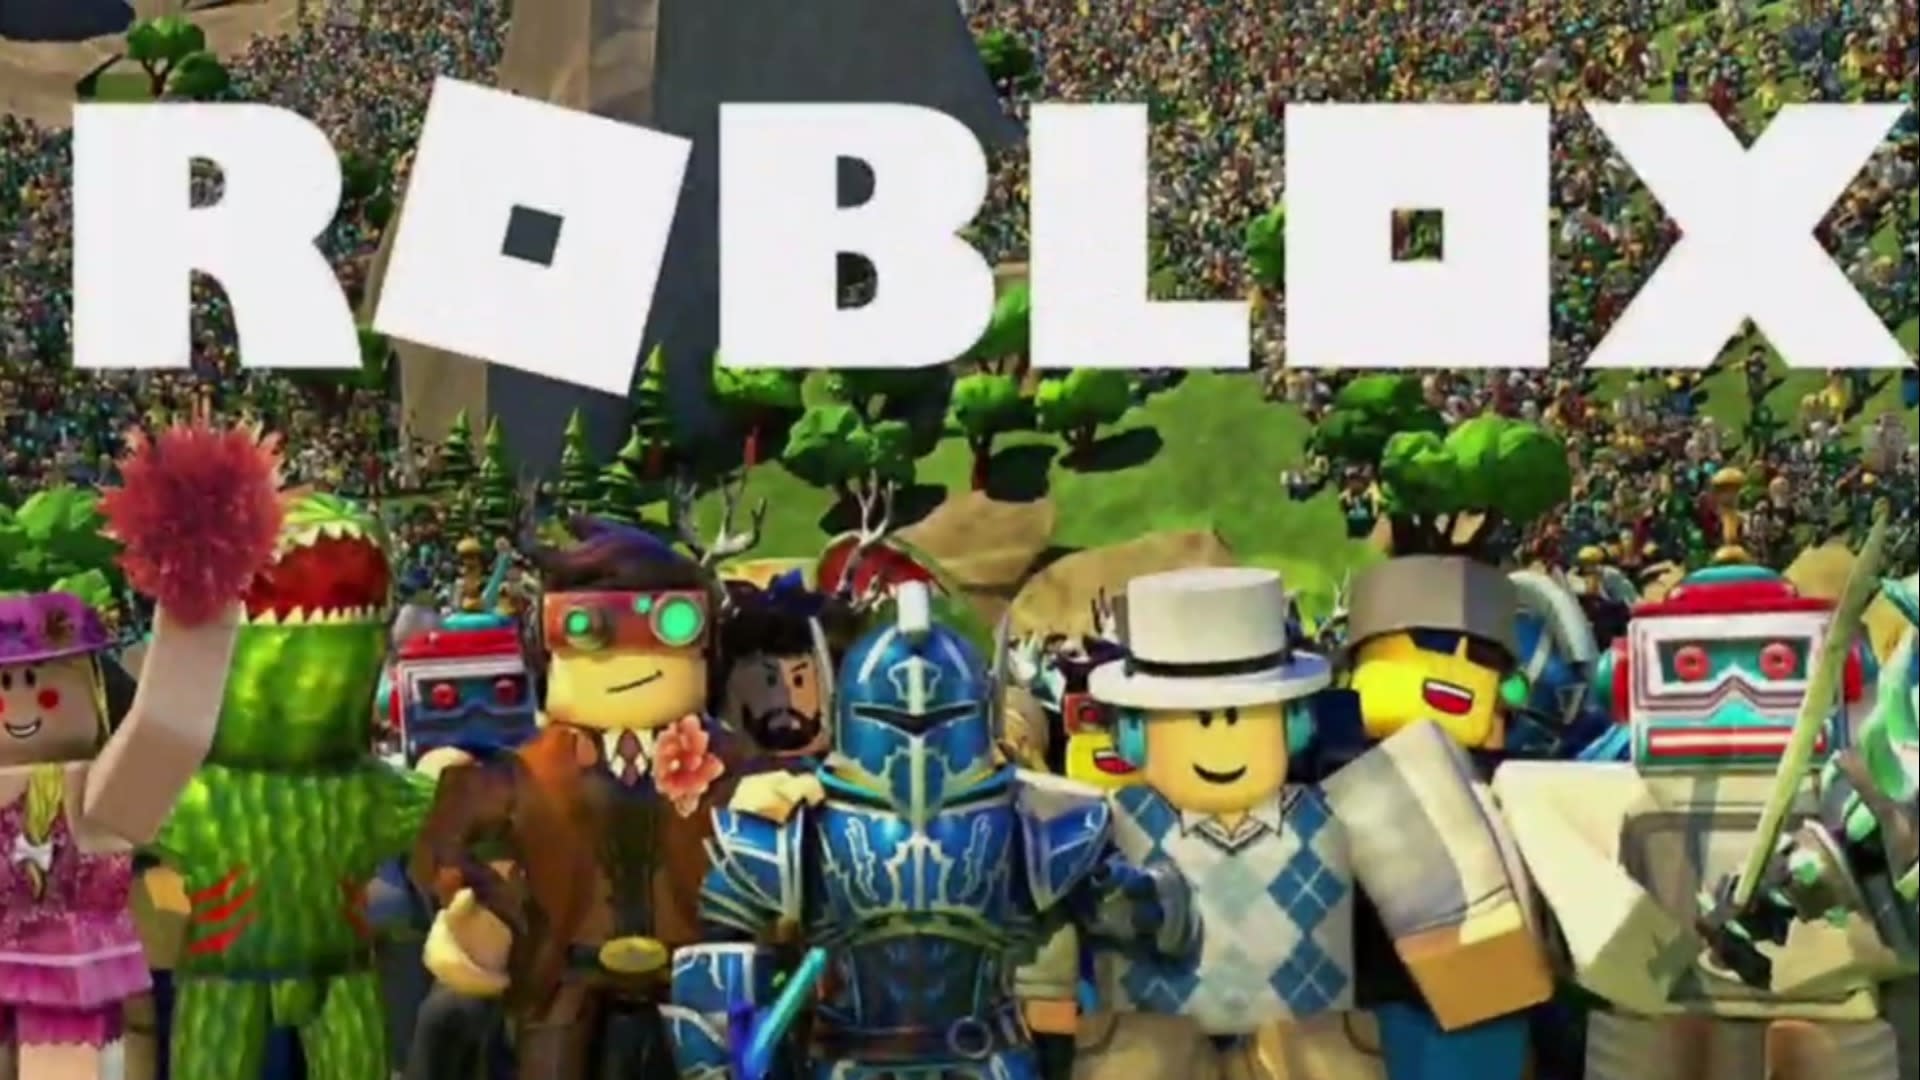 New Questions About Some Inappropriate Content On The Gaming Platform Roblox Video - roblox api game